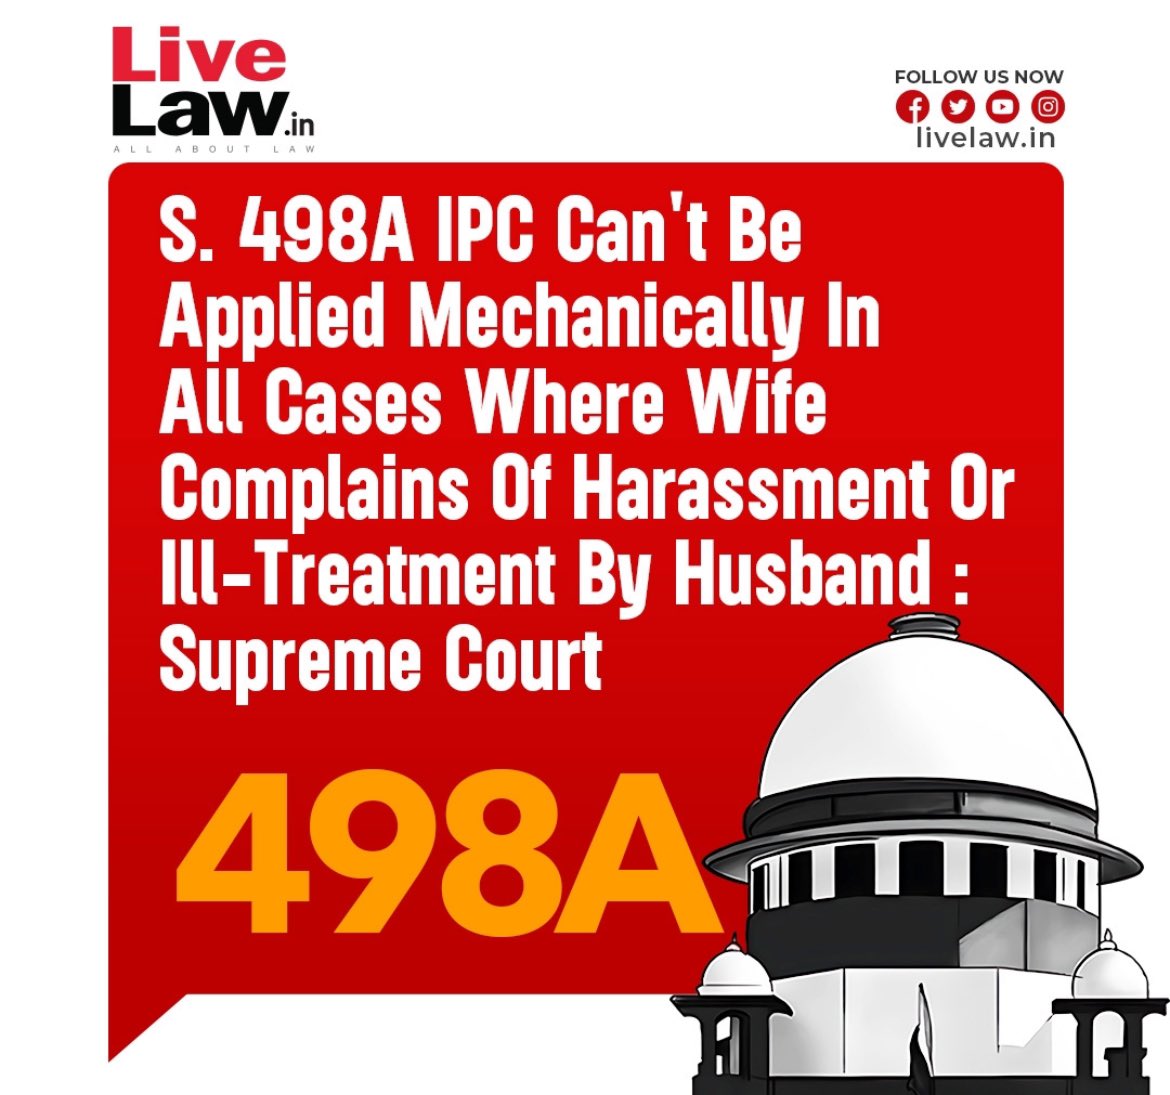 Wish subordinates listen and implement 

#498A